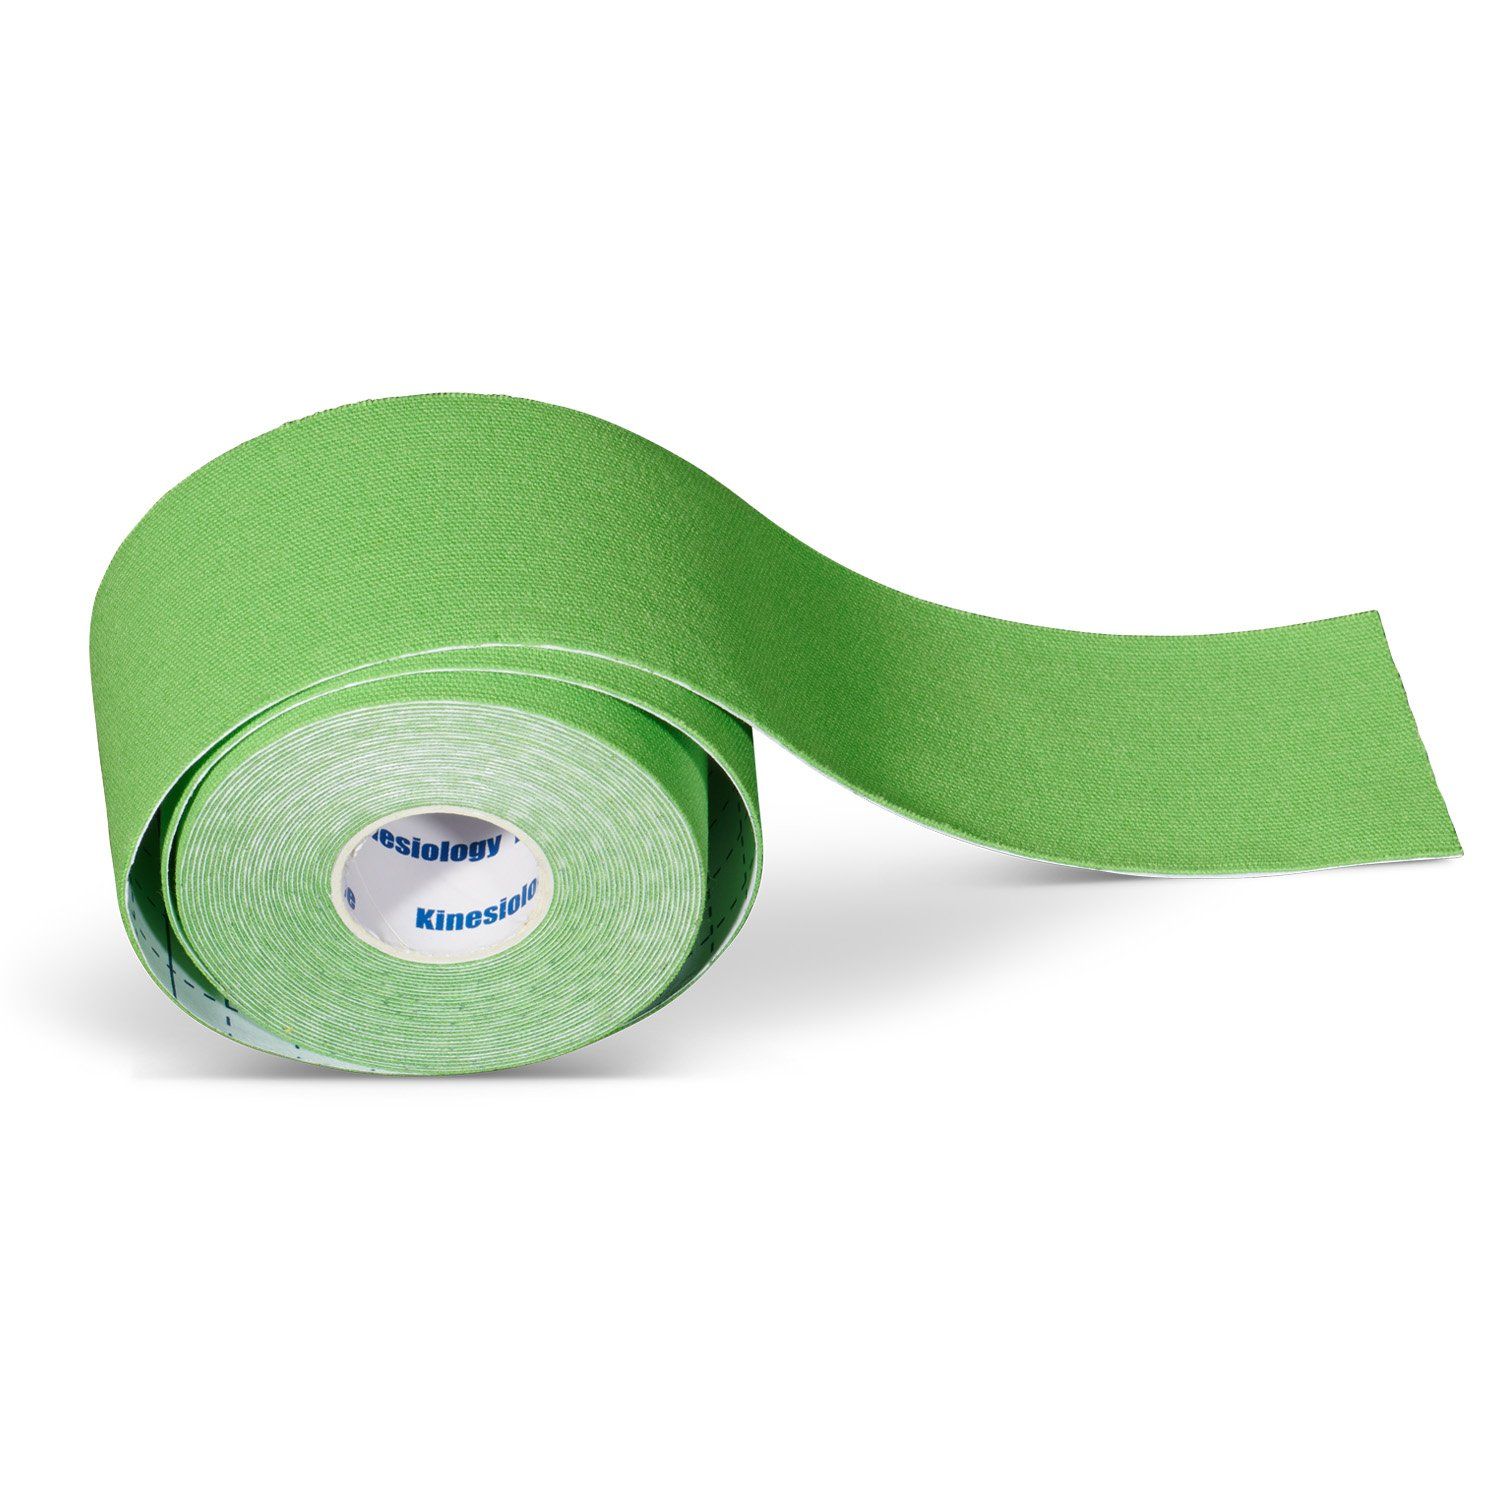 Kinesiology tape 6 rolls plus 2 rolls for free green